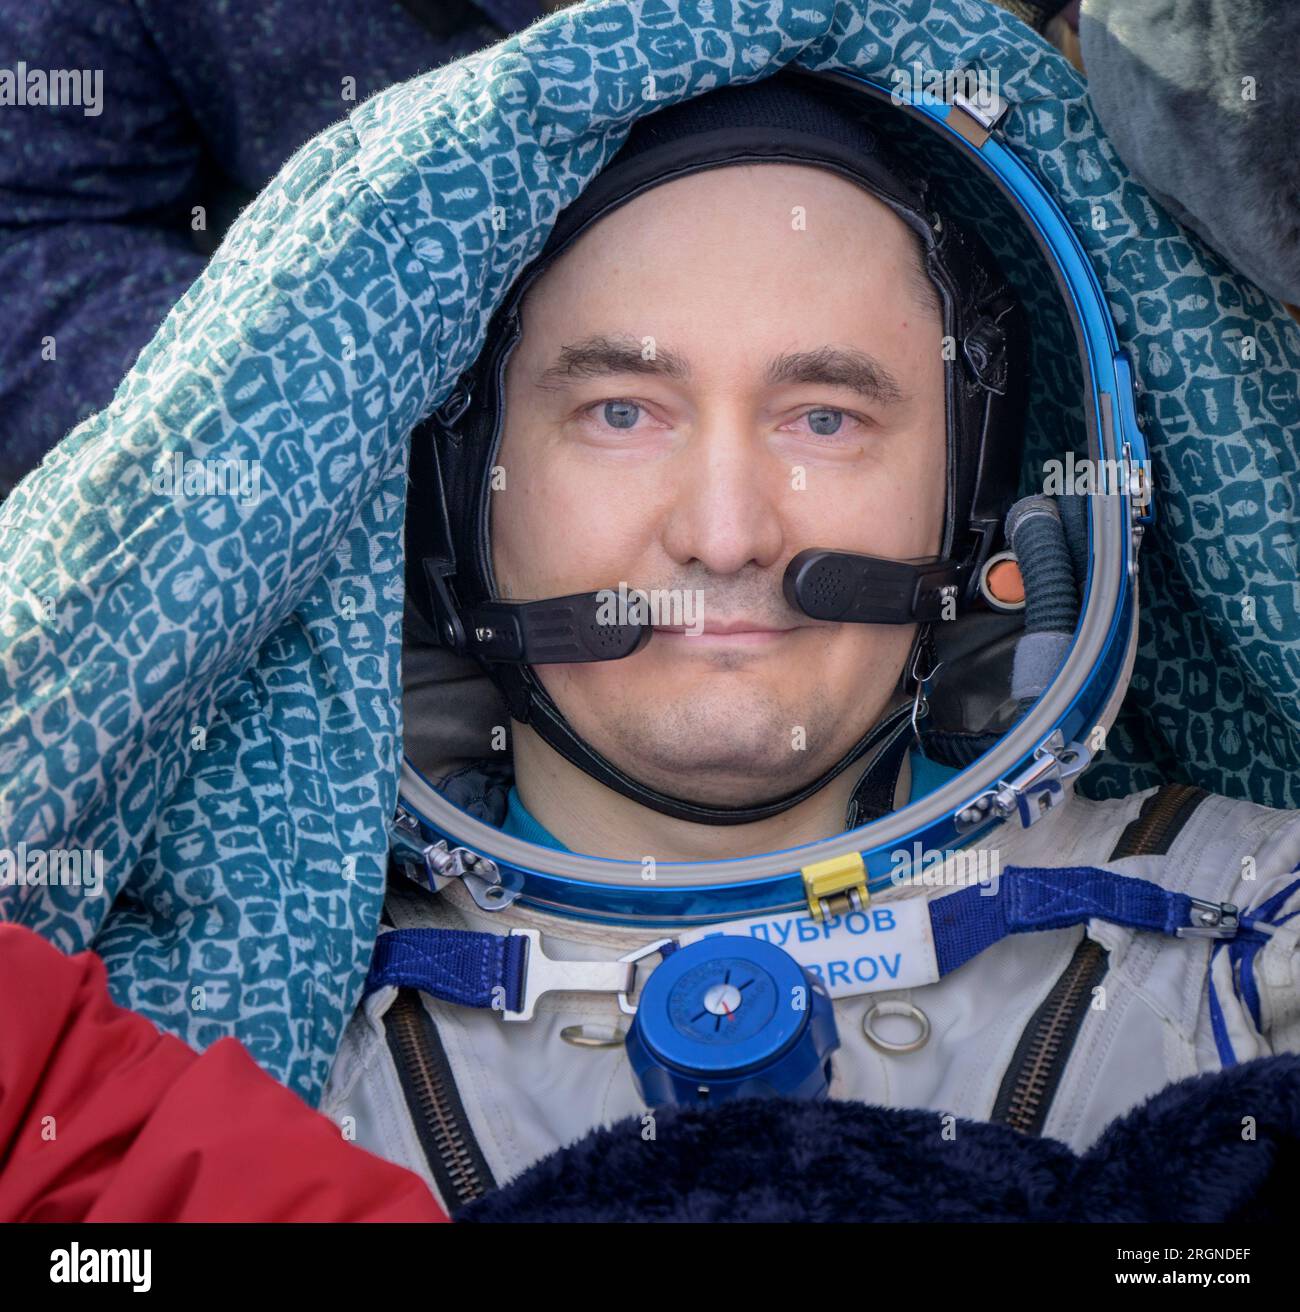 Reportage: Expedition 66 Soyuz Landing (March 2022) - Russian cosmonaut Pyotr Dubrov is seen outside the Soyuz MS-19 spacecraft after he landed with fellow Expedition 66 crew members in a remote area near the town of Zhezkazgan, Kazakhstan on Wednesday, March 30, 2022. Stock Photo